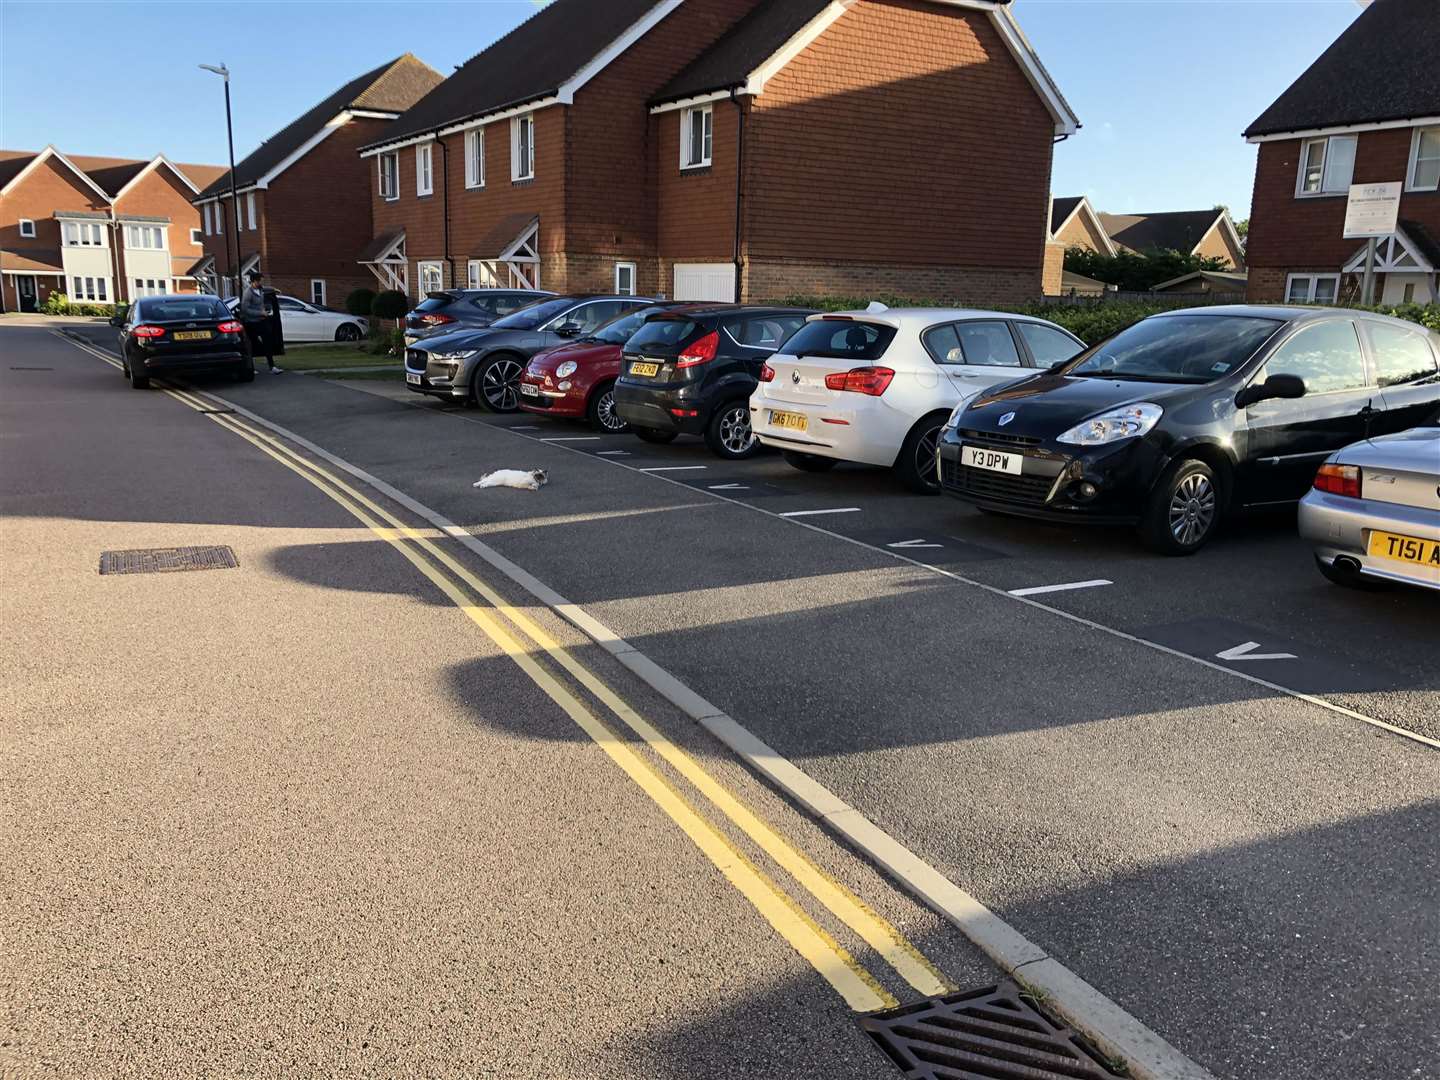 The visitors' parking bays are frequently fully occupied